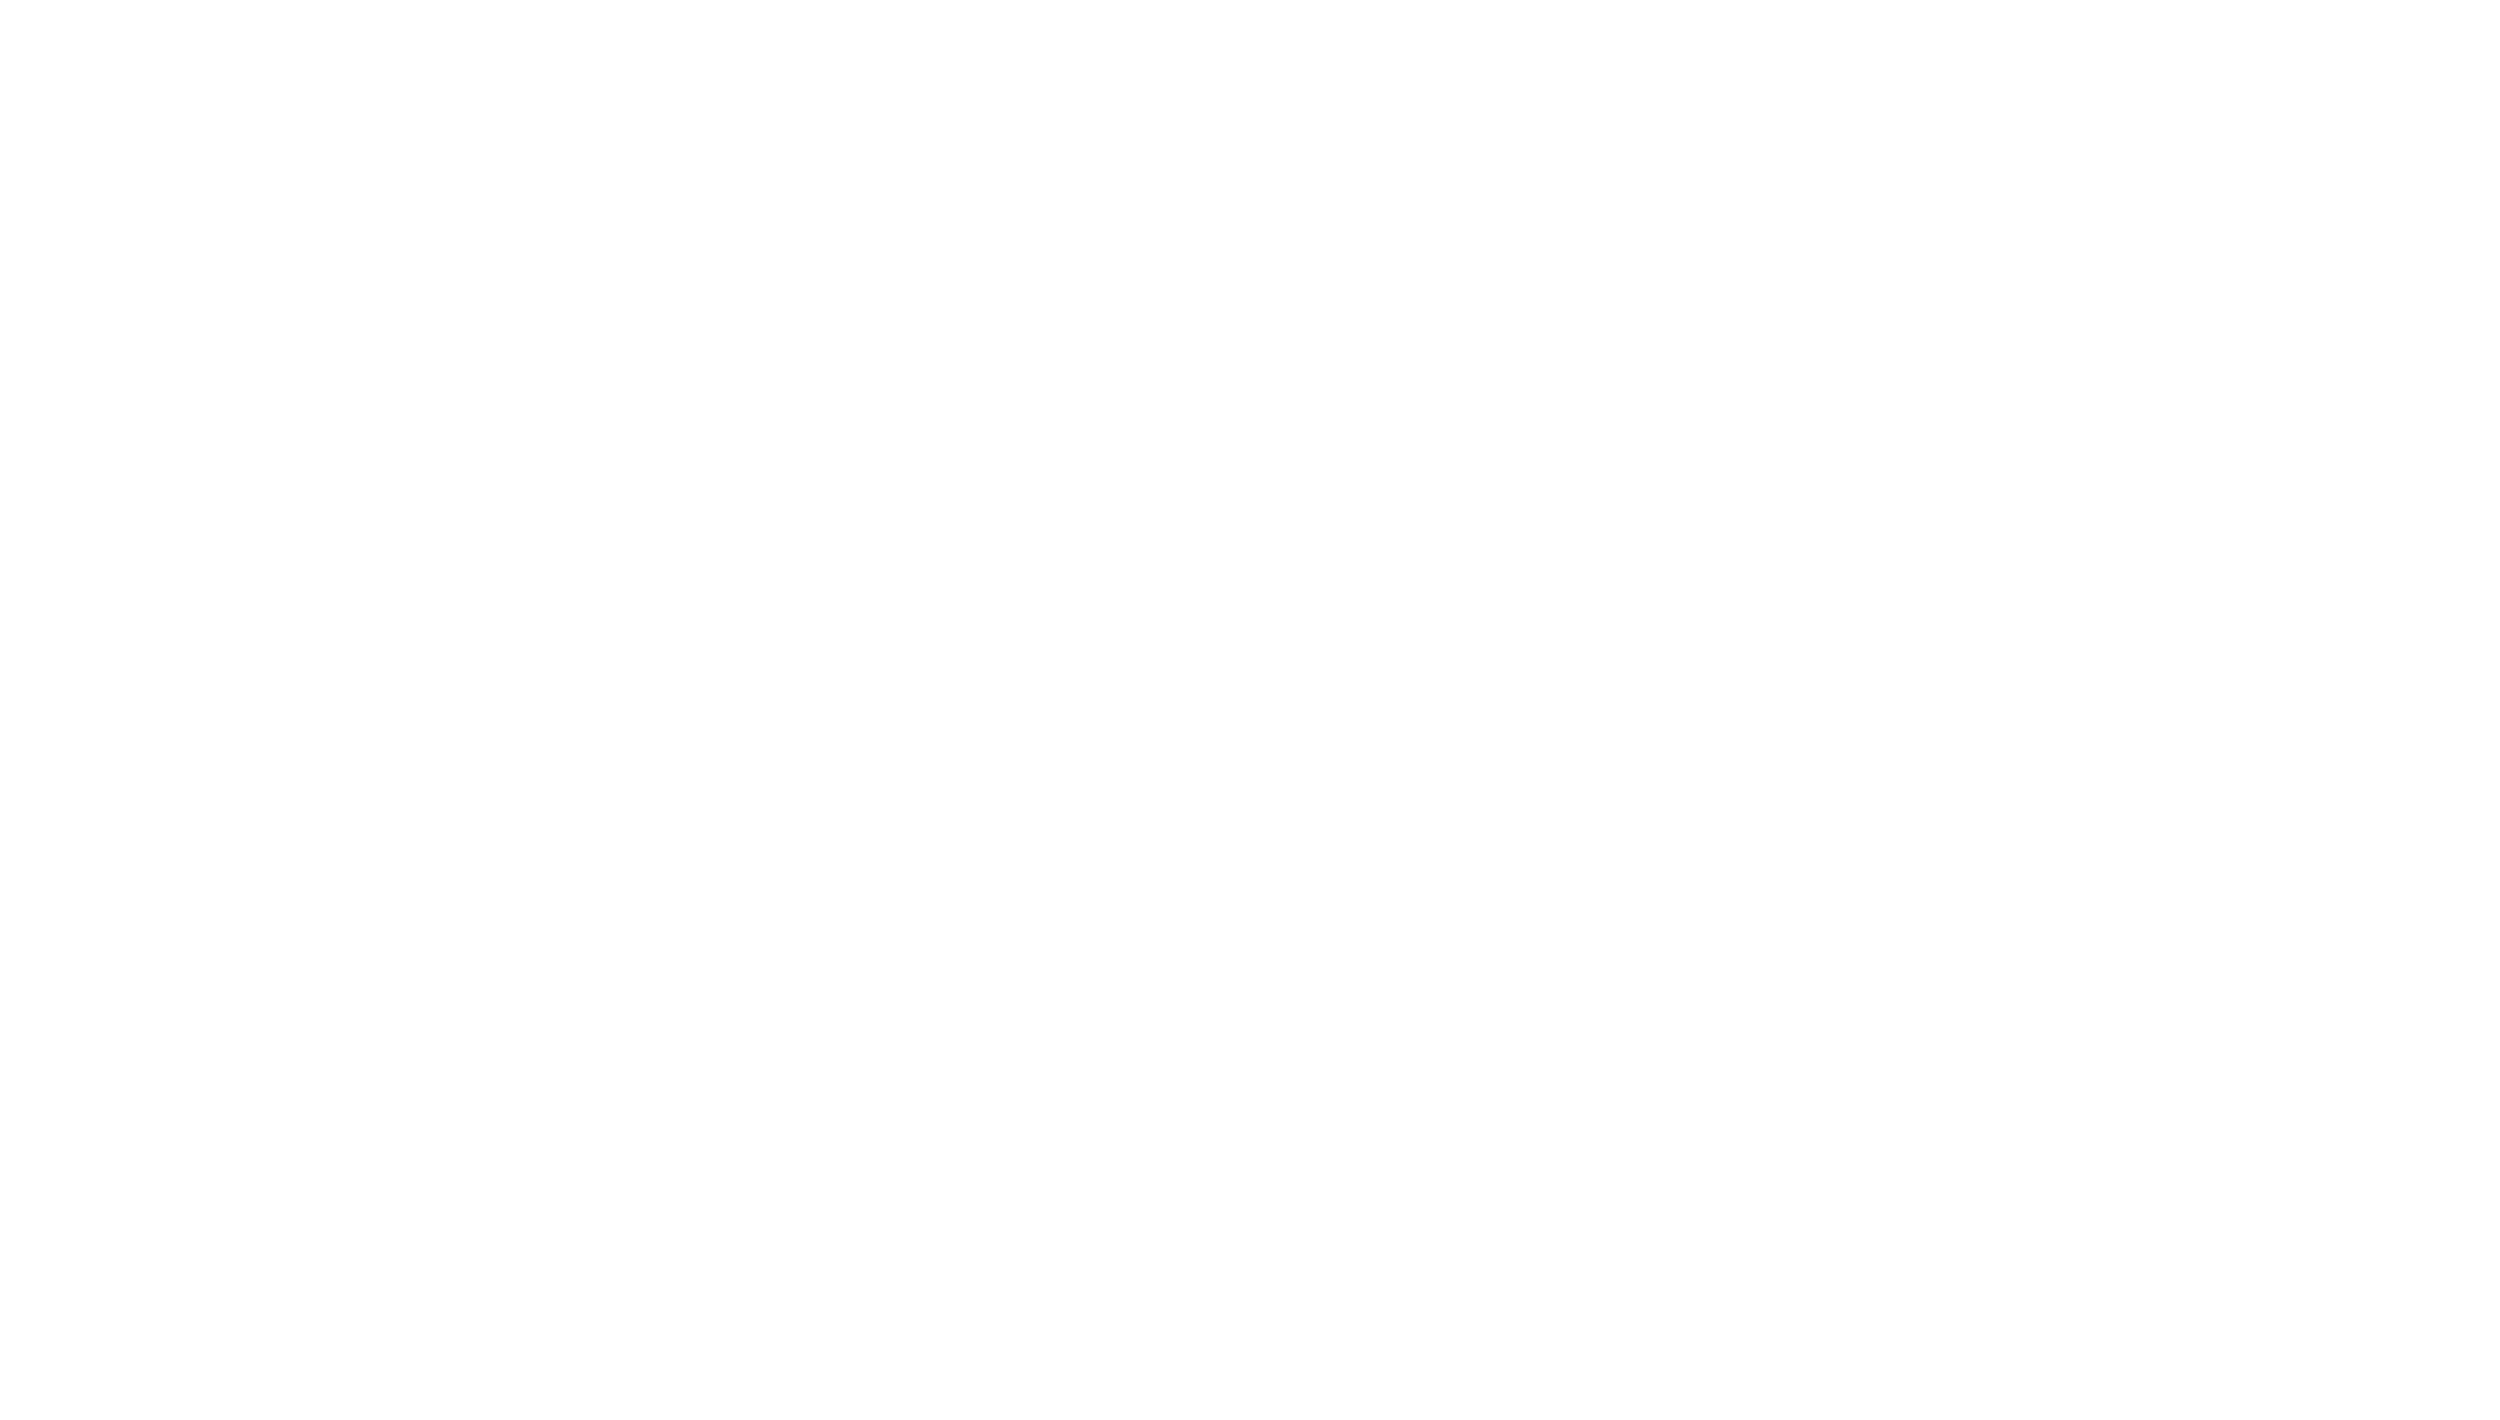 Leaseplan.png